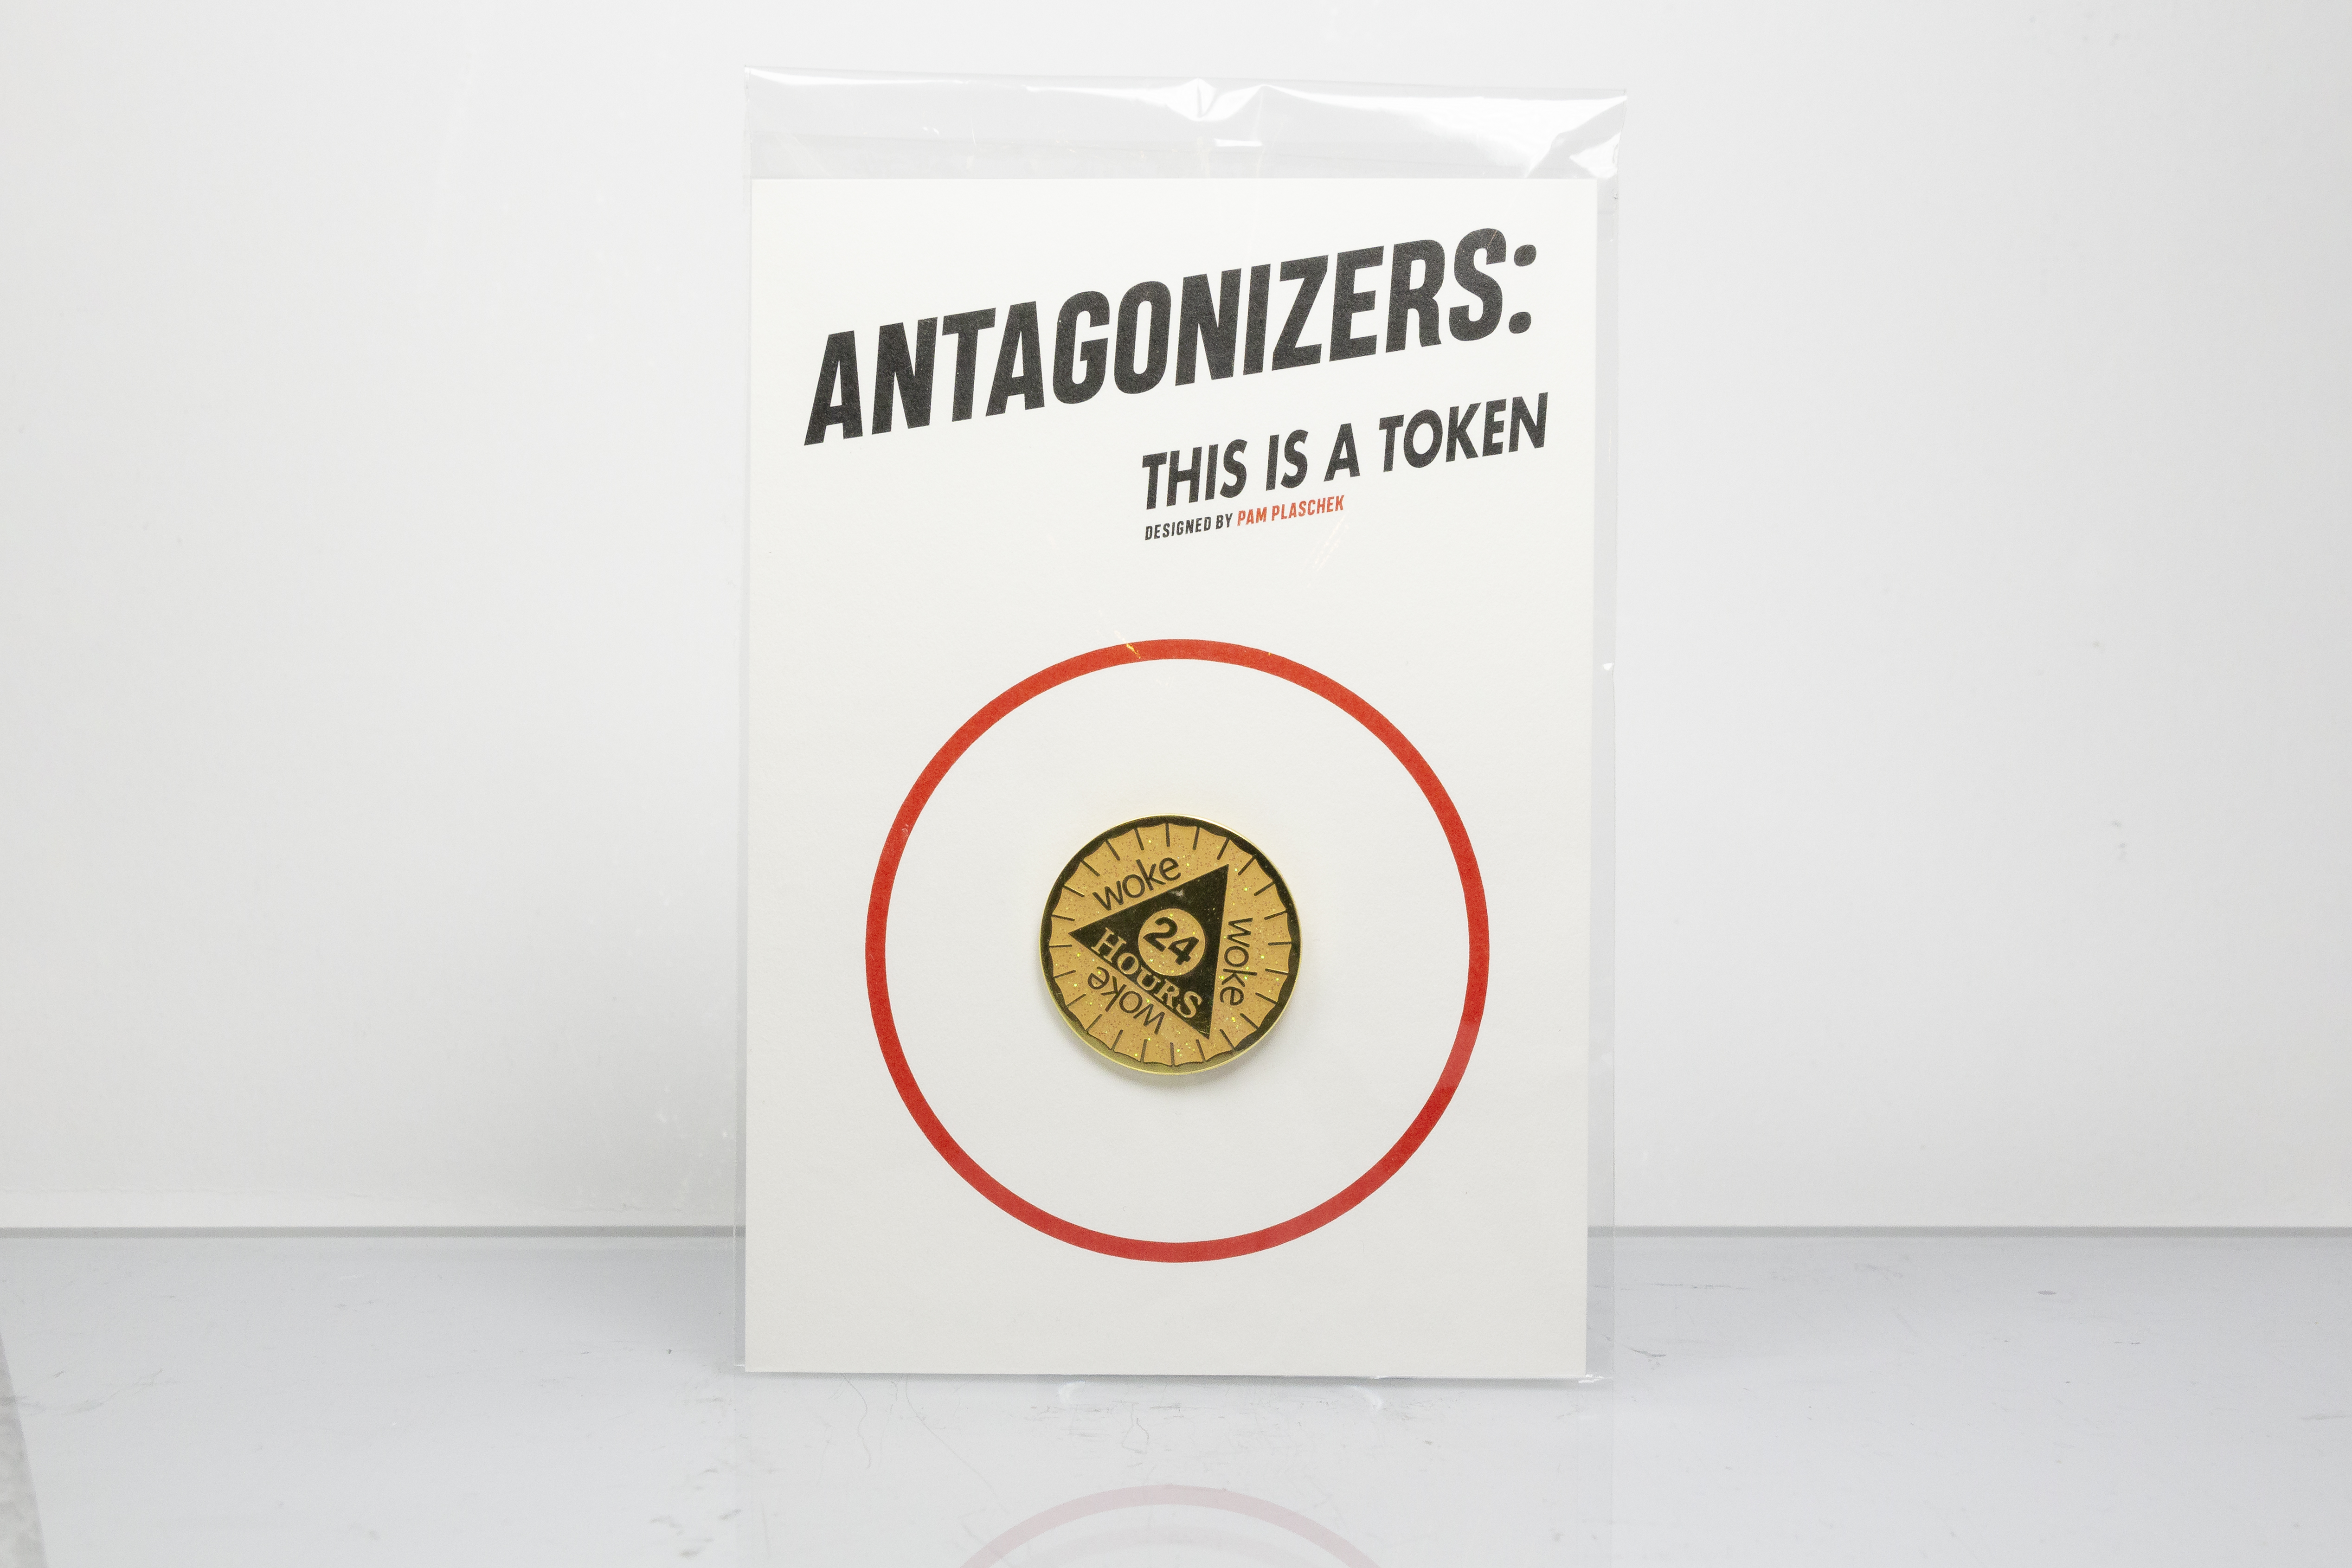 Antagonizers: This is a token